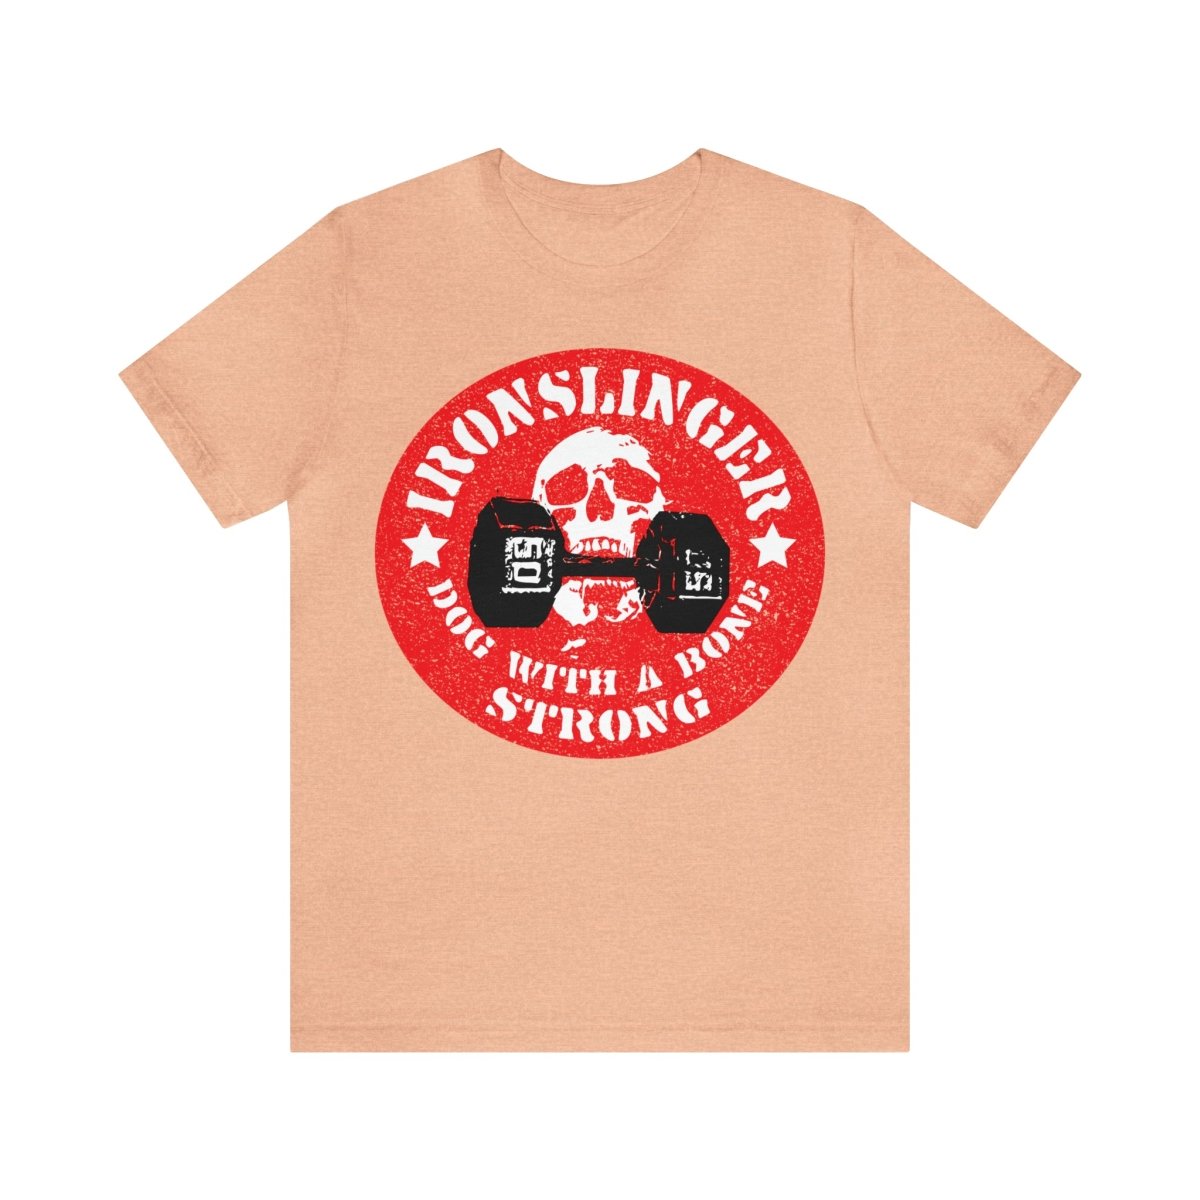 Ironslinger Dog With A Bone Strong Premium T-Shirt, Weightlifting